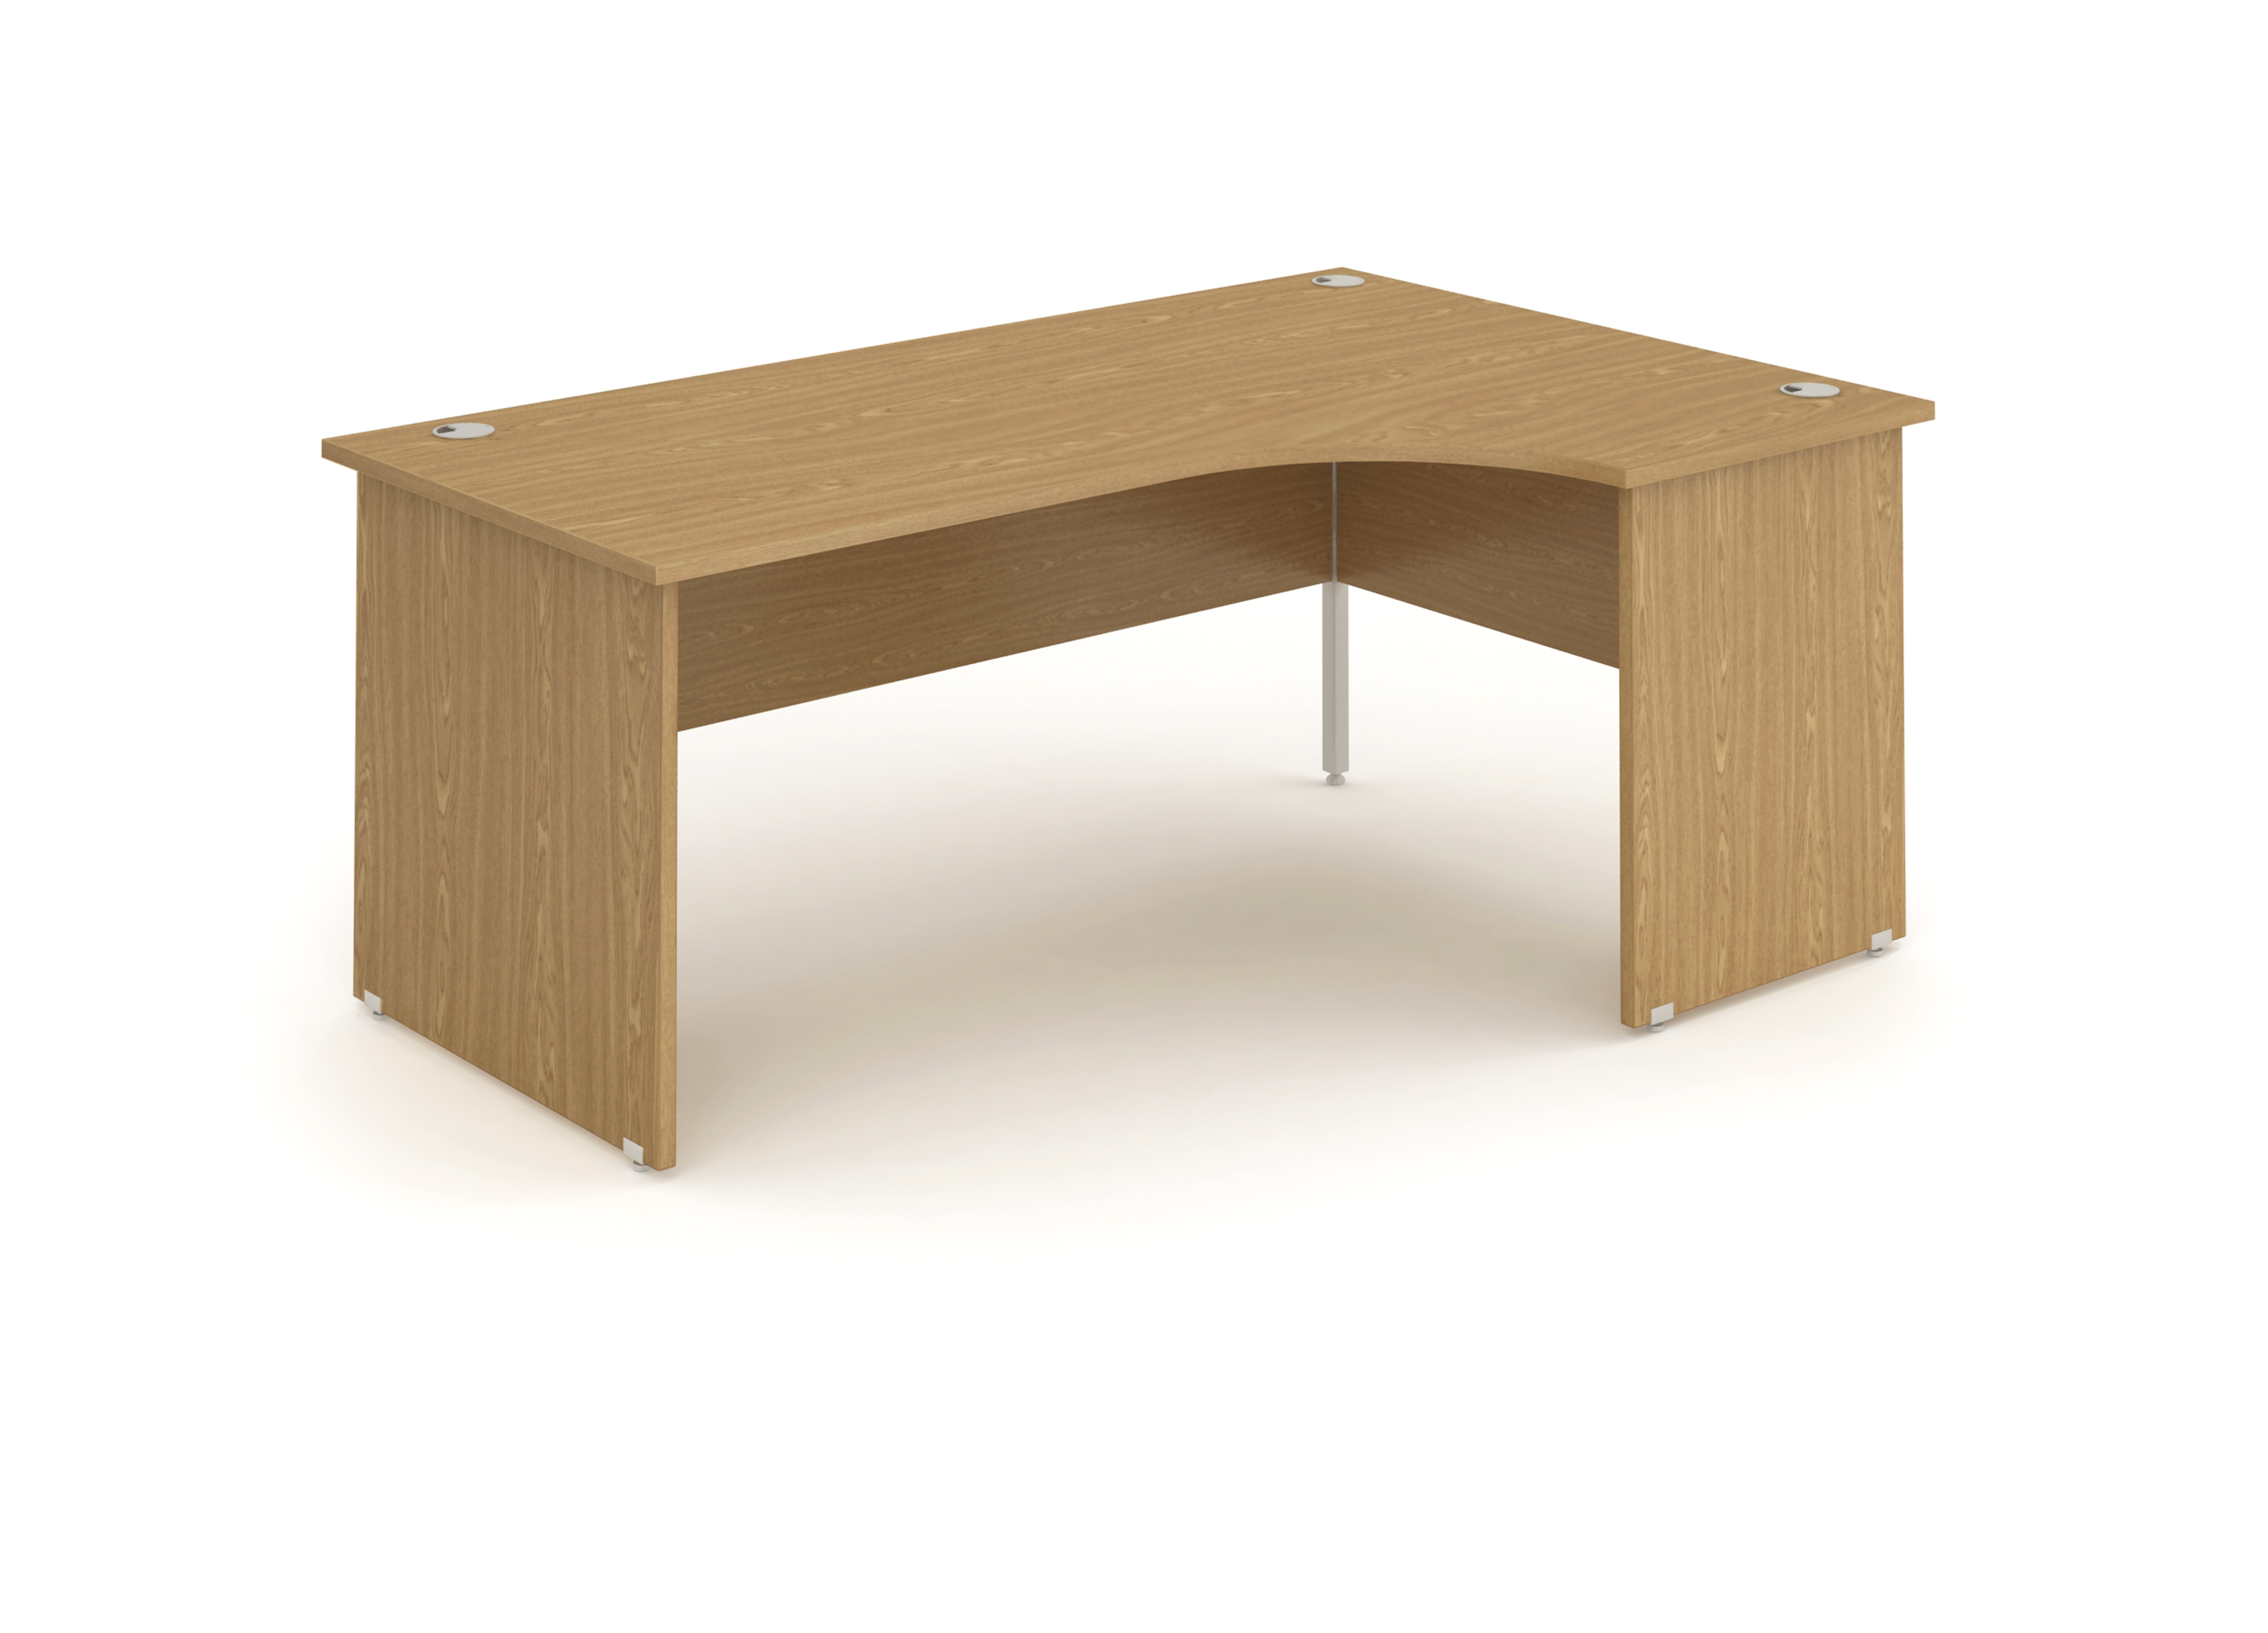 Intrigue panel end radial desk